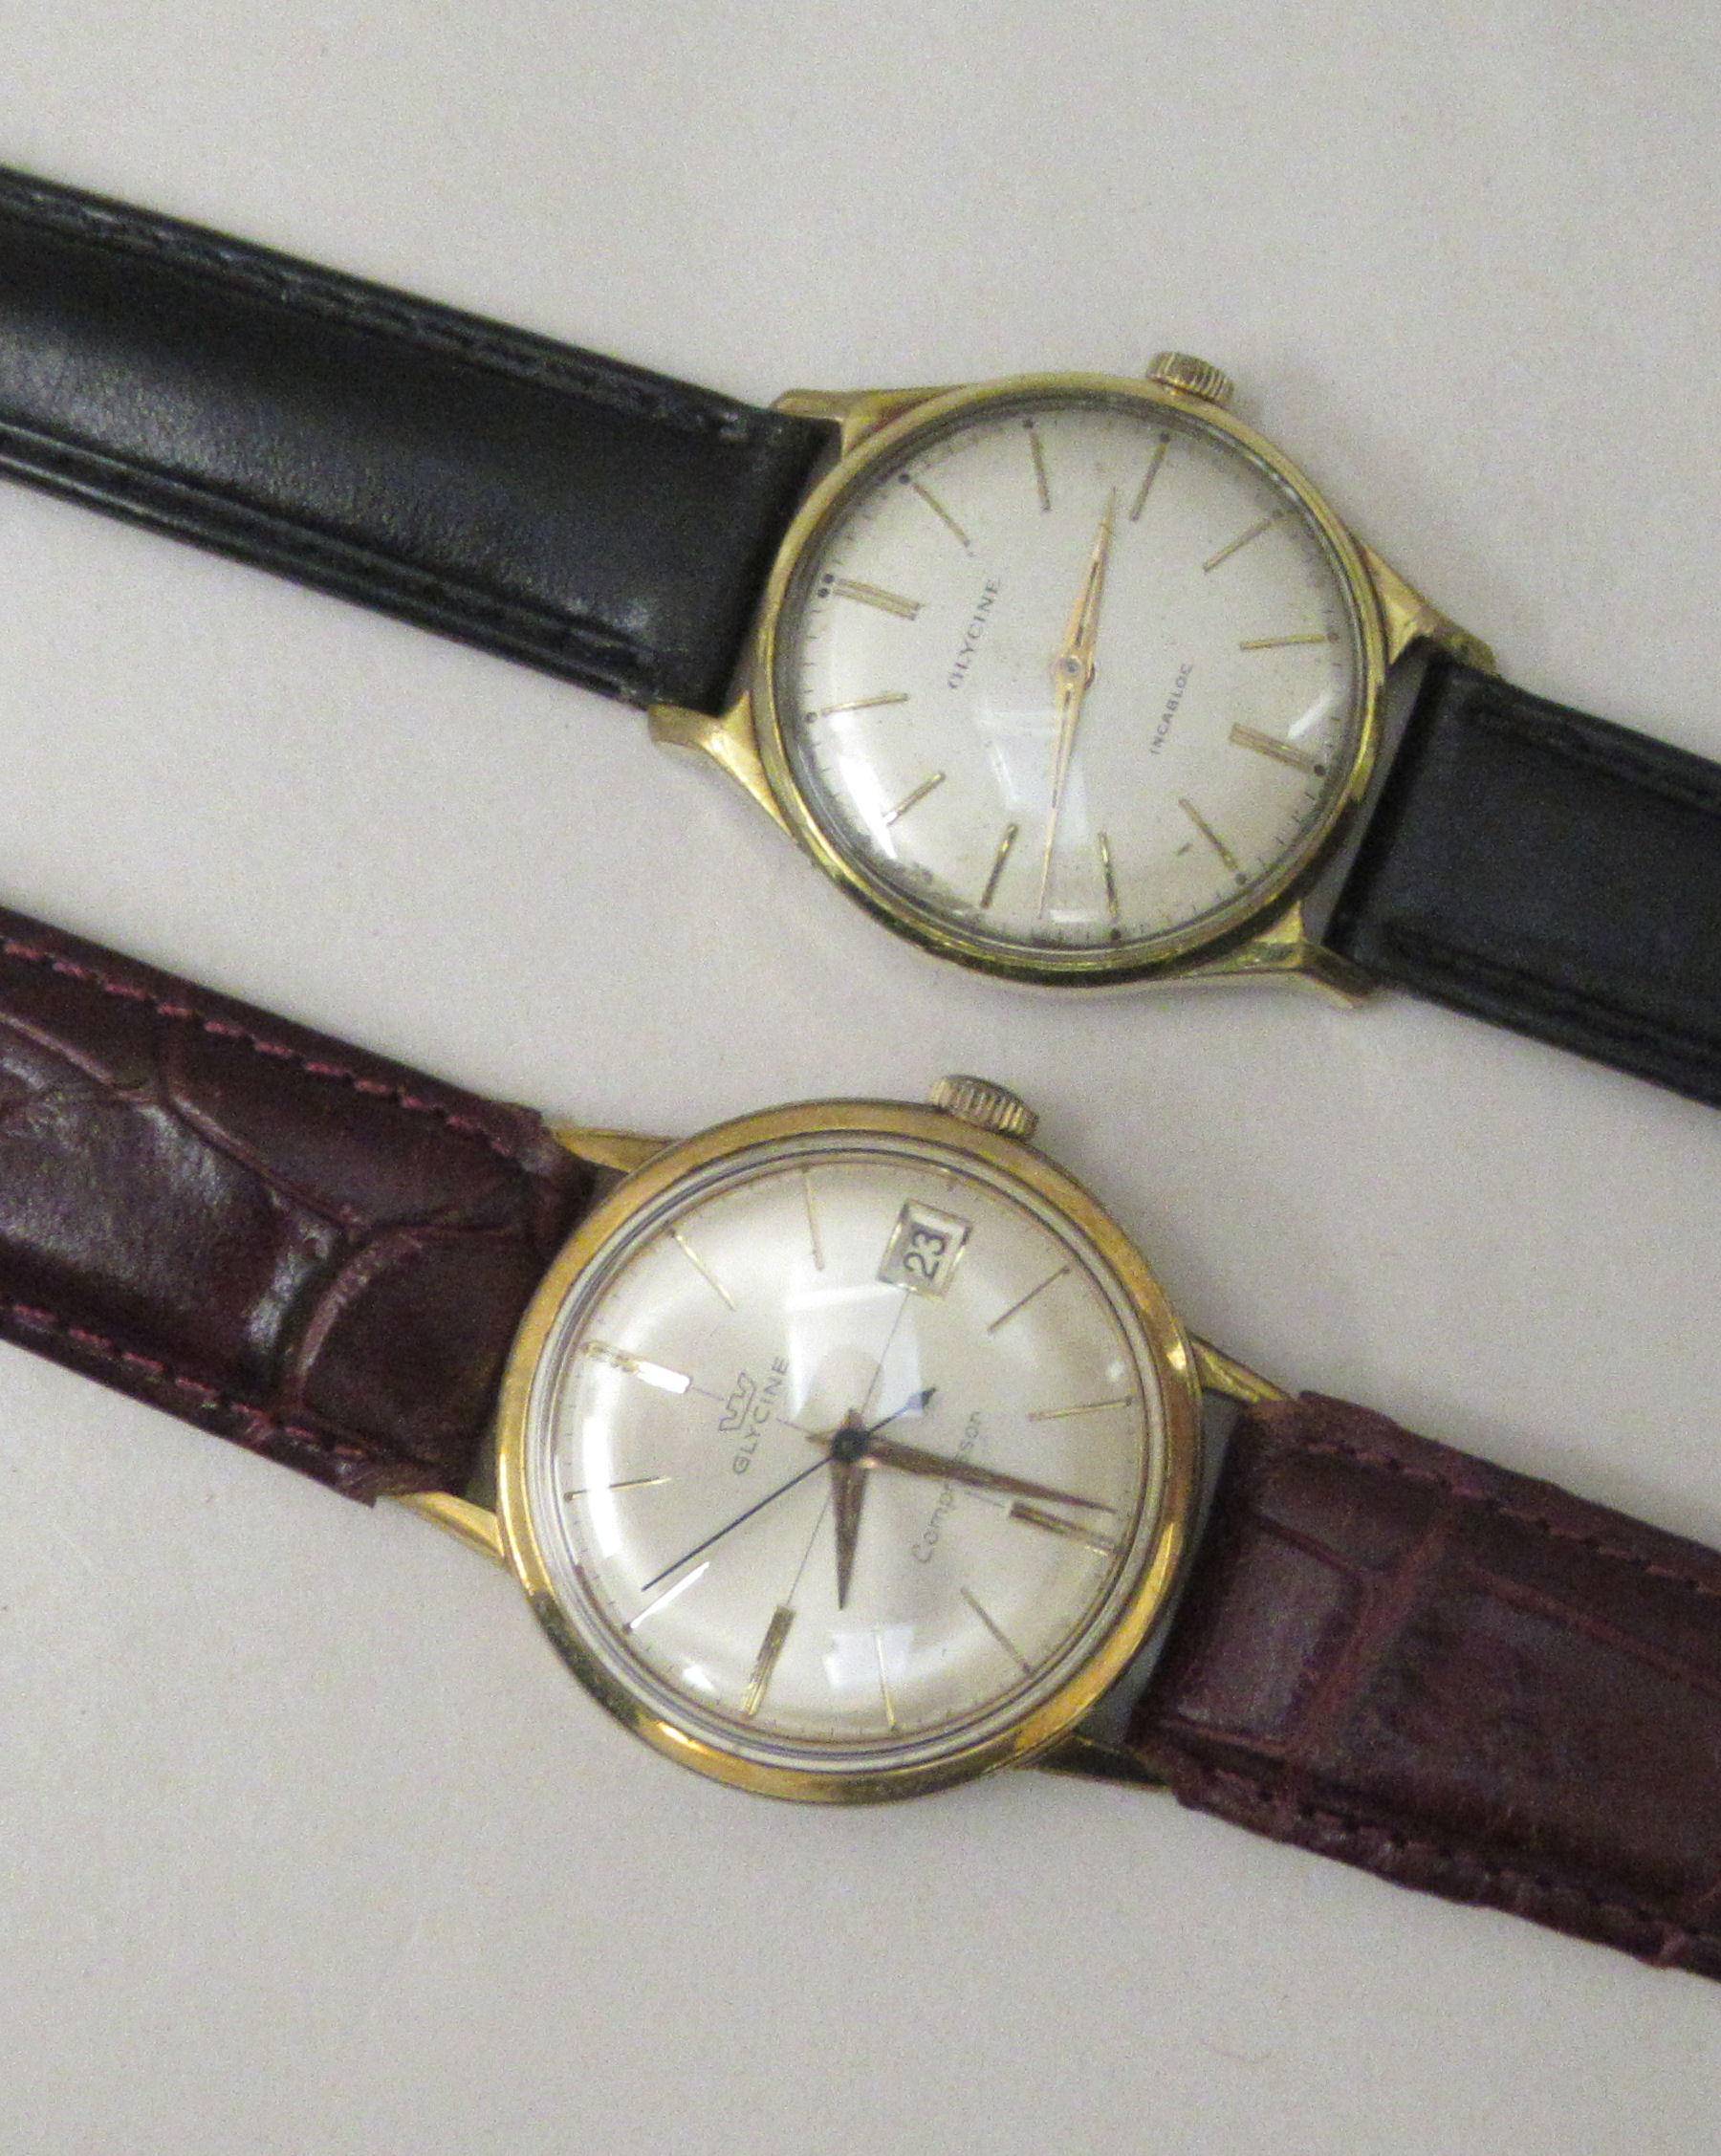 A 1960s Clycine Compressor gold plated and stainless steel cased wristwatch, the movement with